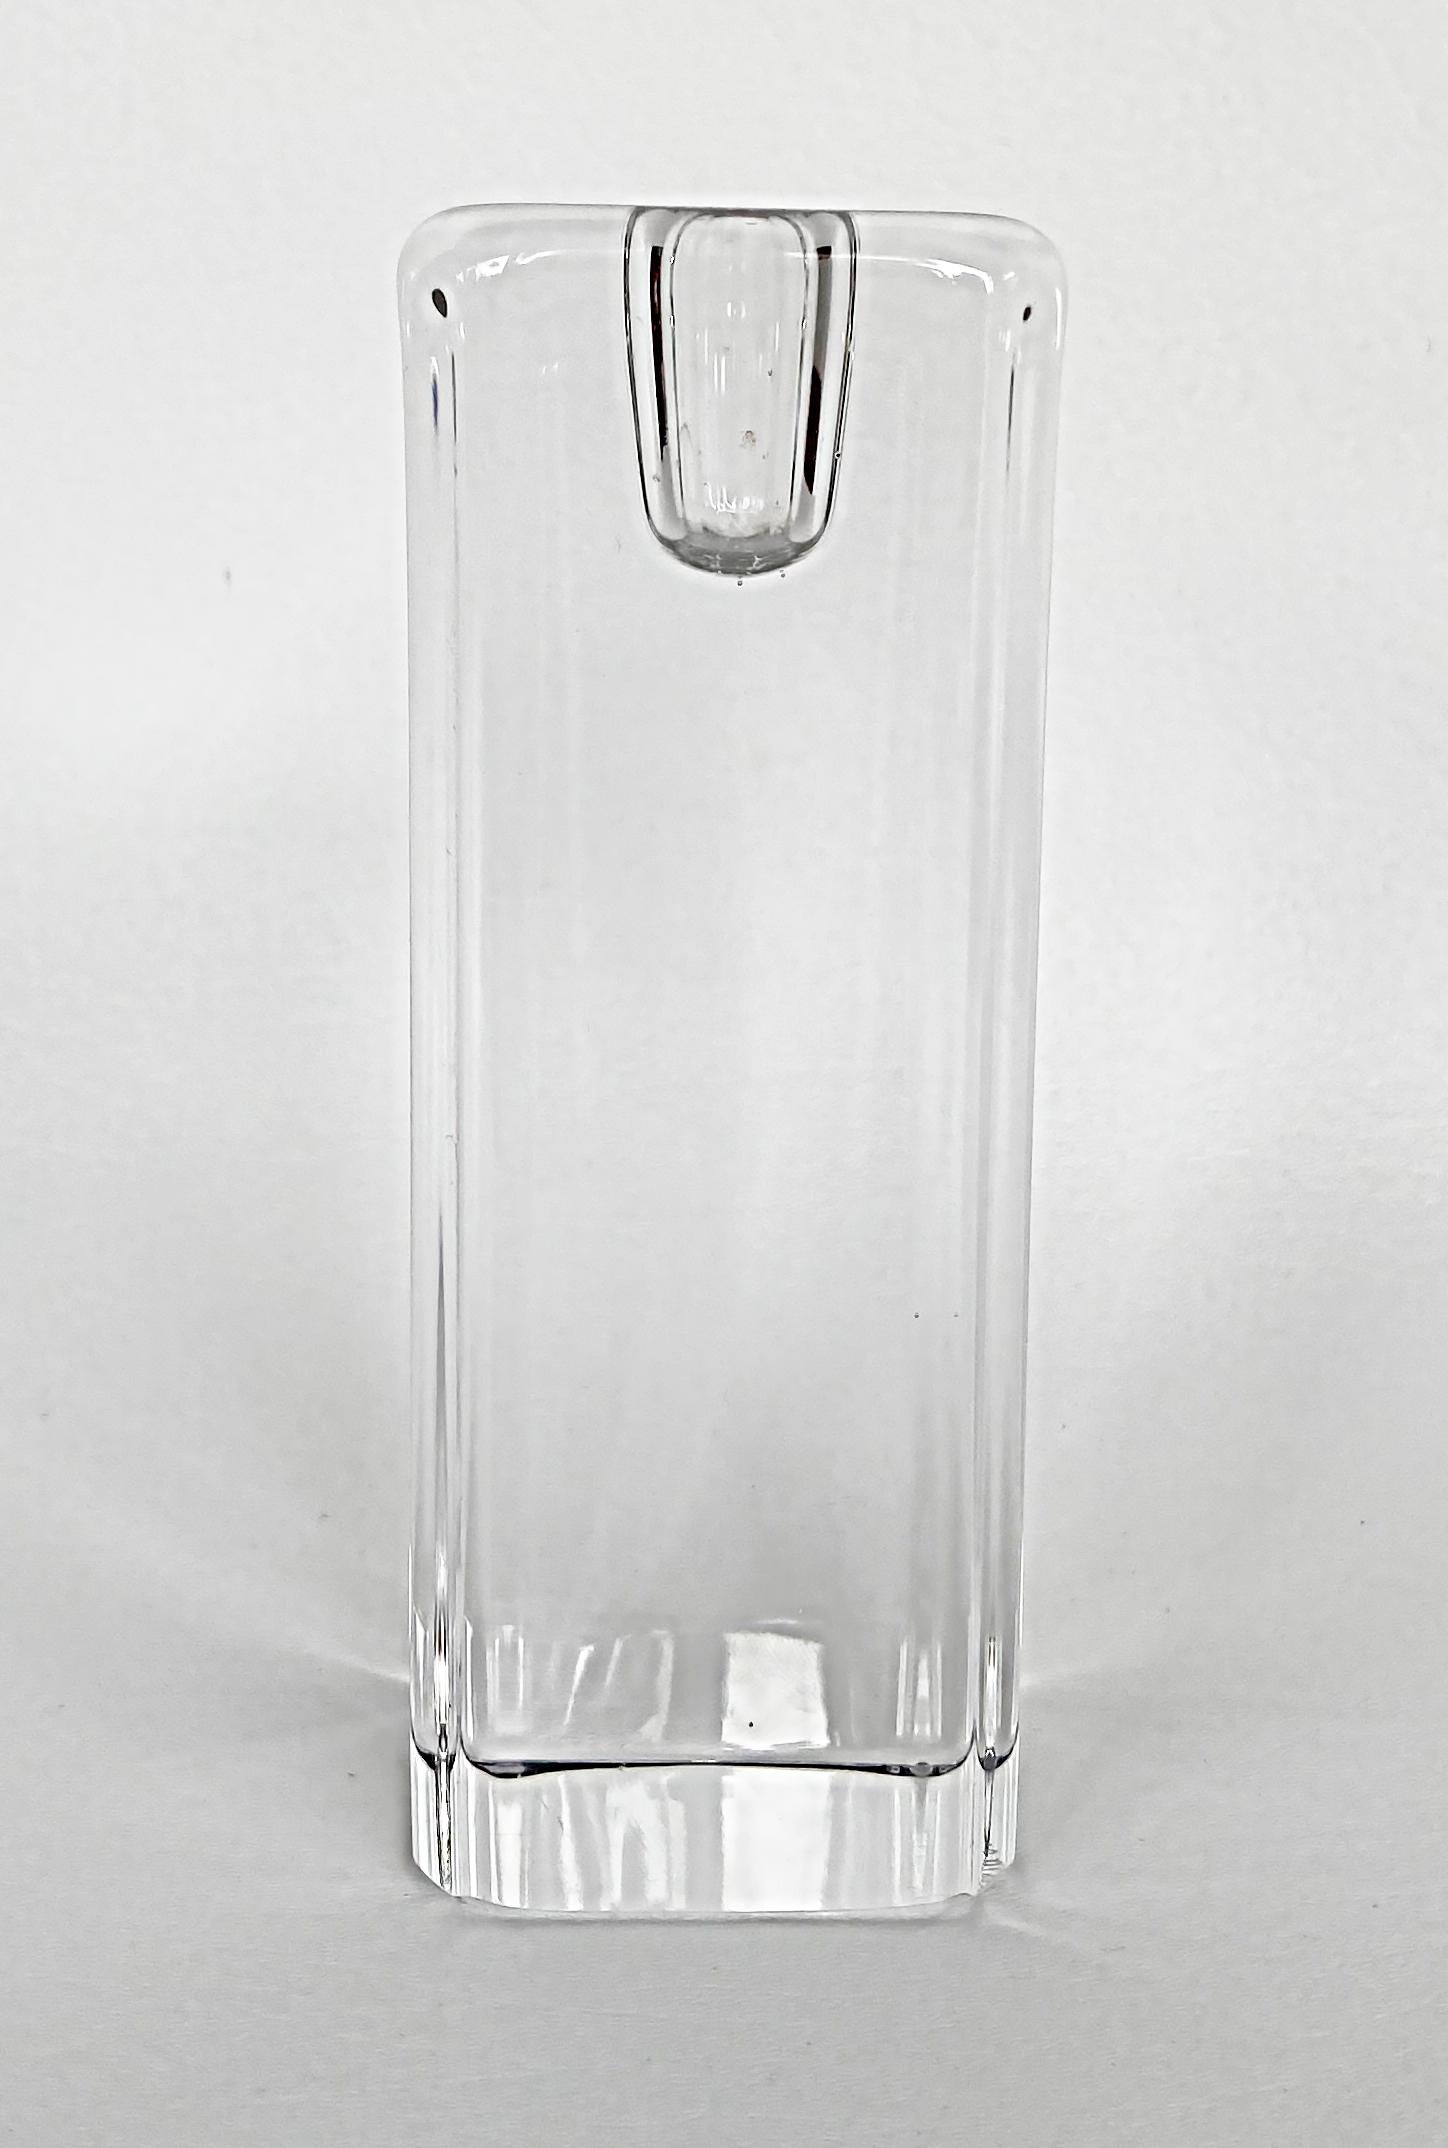 Kosta Boda Anna Ehrner Tall Crystal Candle Holders, Pair In Good Condition For Sale In Miami, FL